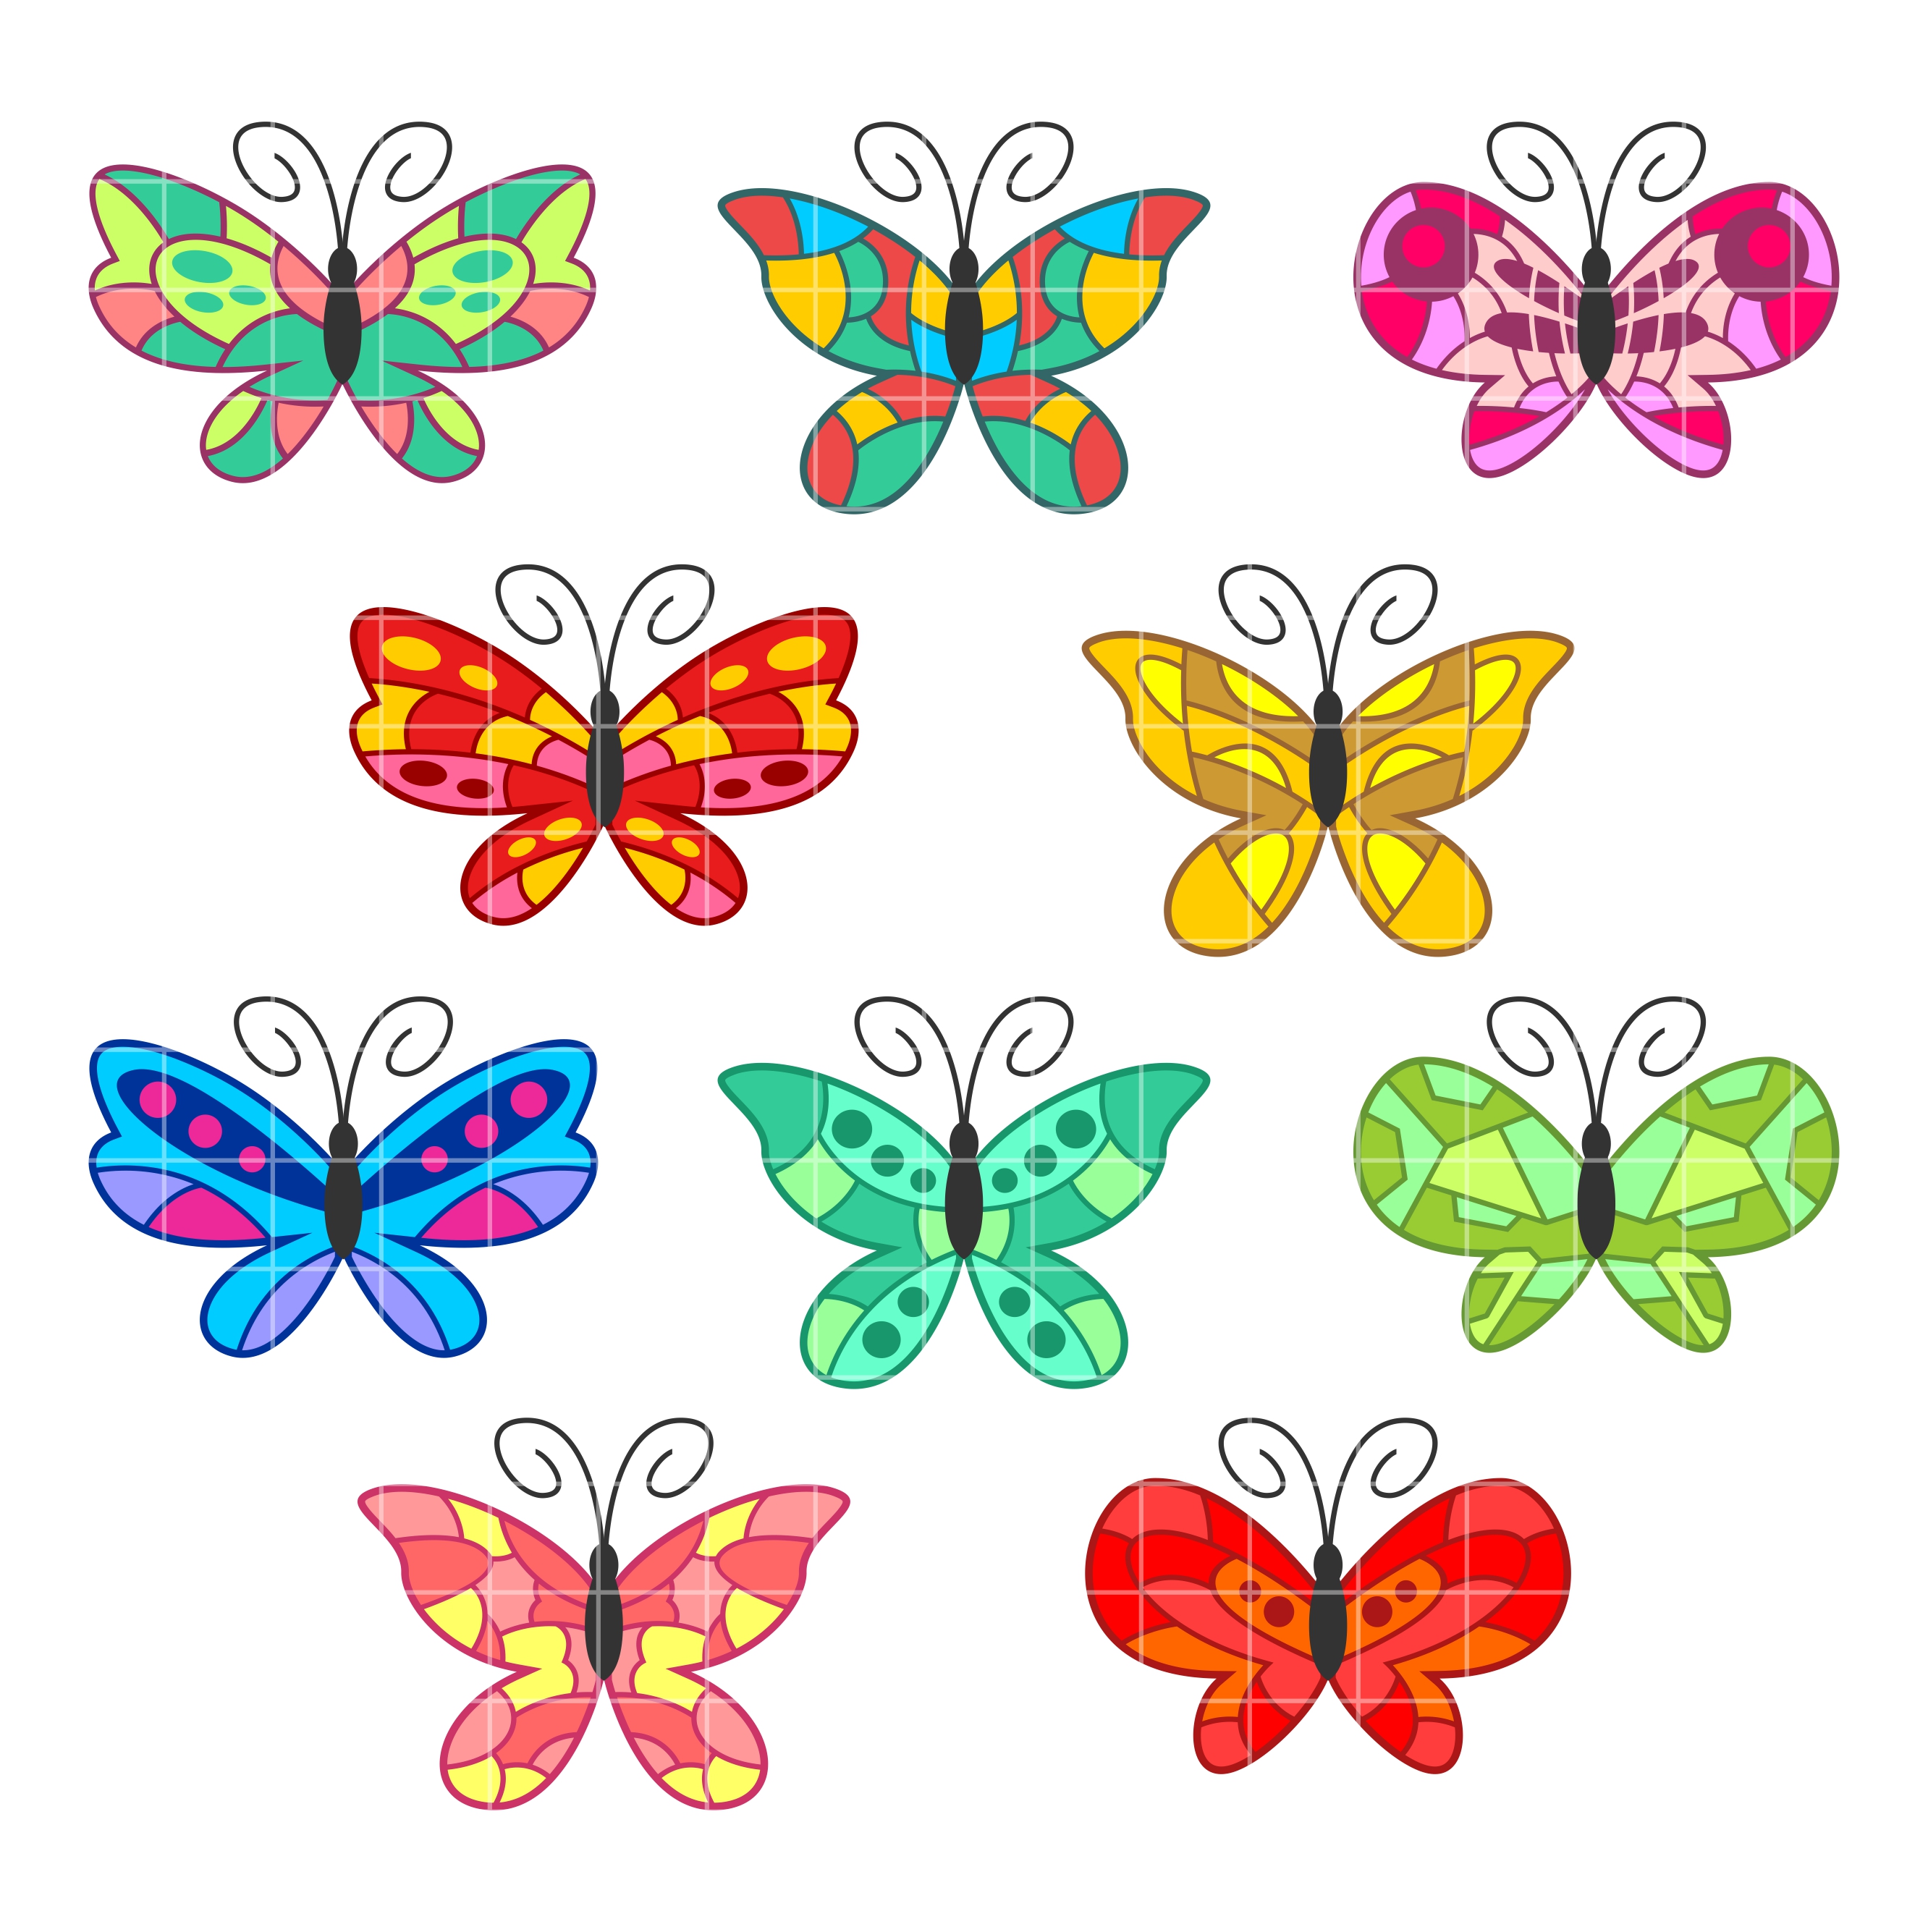 Butterflies colorful butterfly designs clipart clipartfest